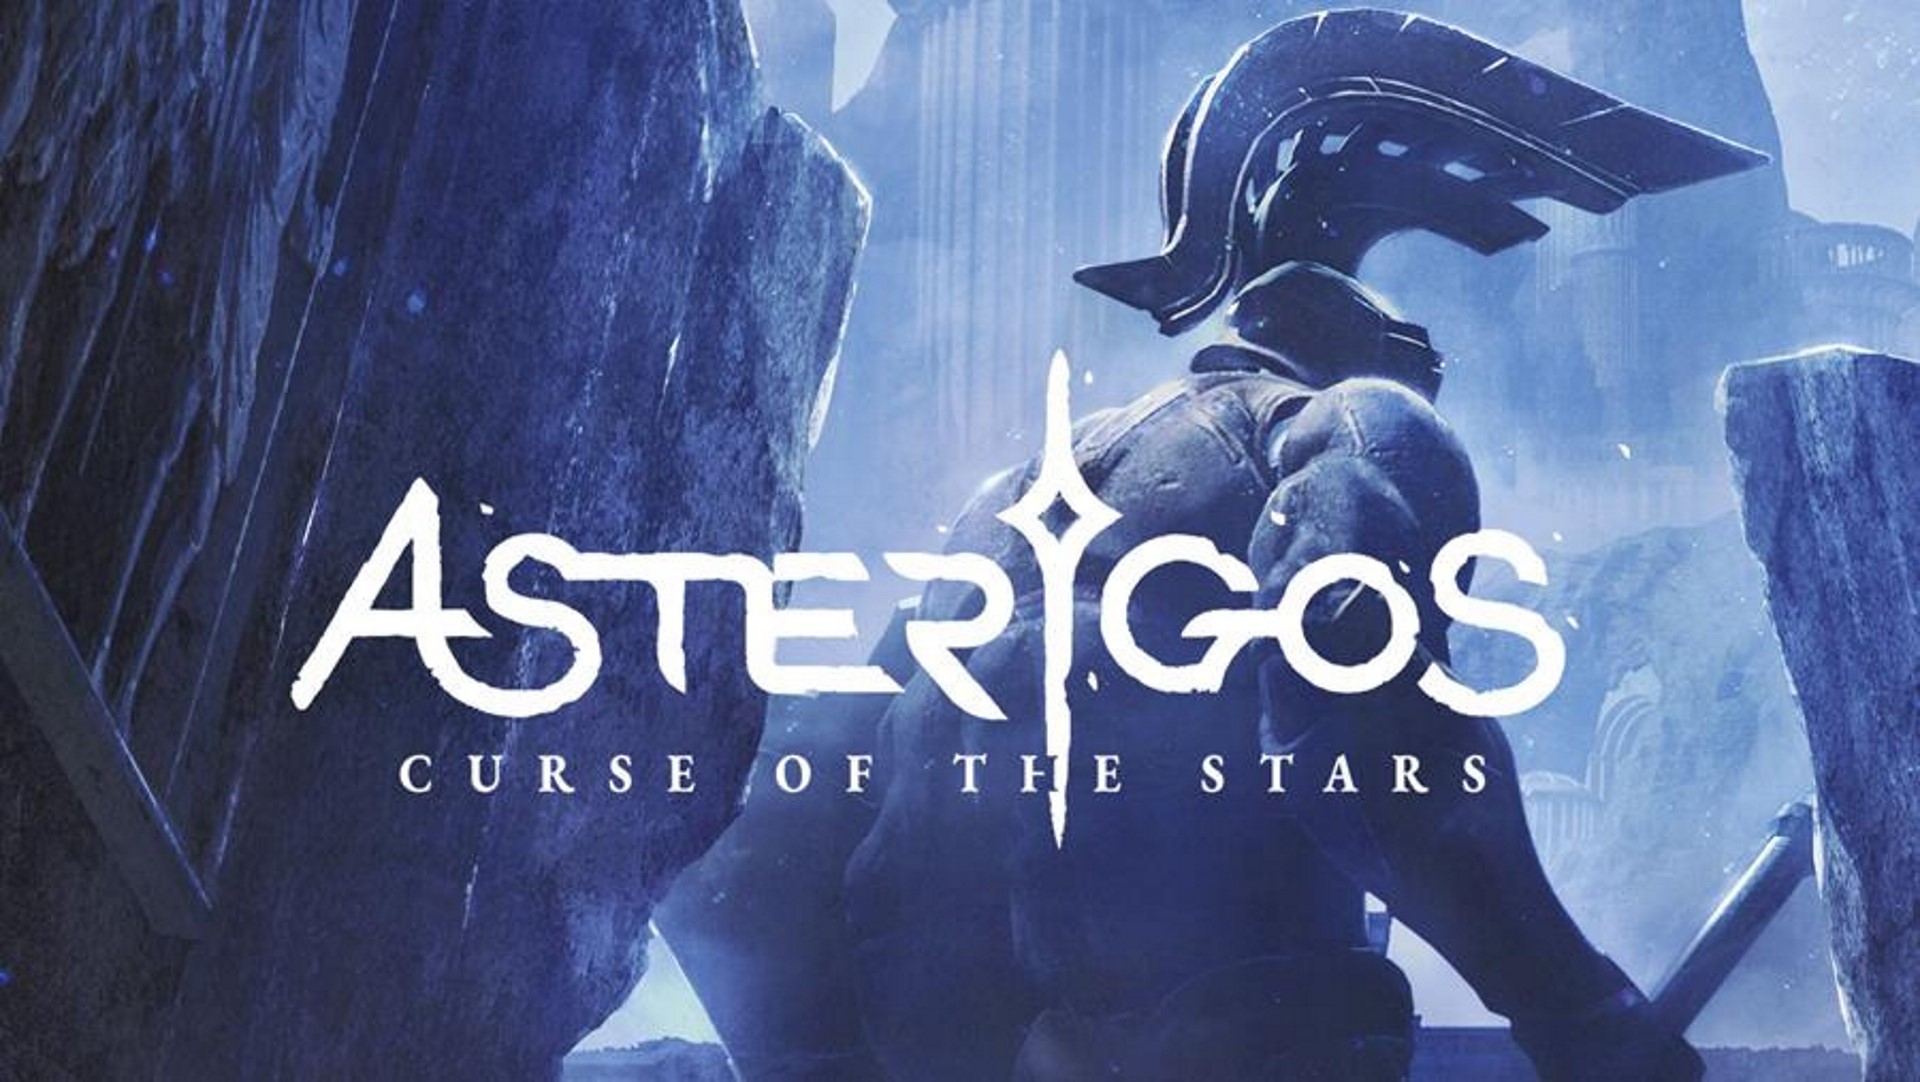 Asterigos: Curse of the Stars download the last version for ios